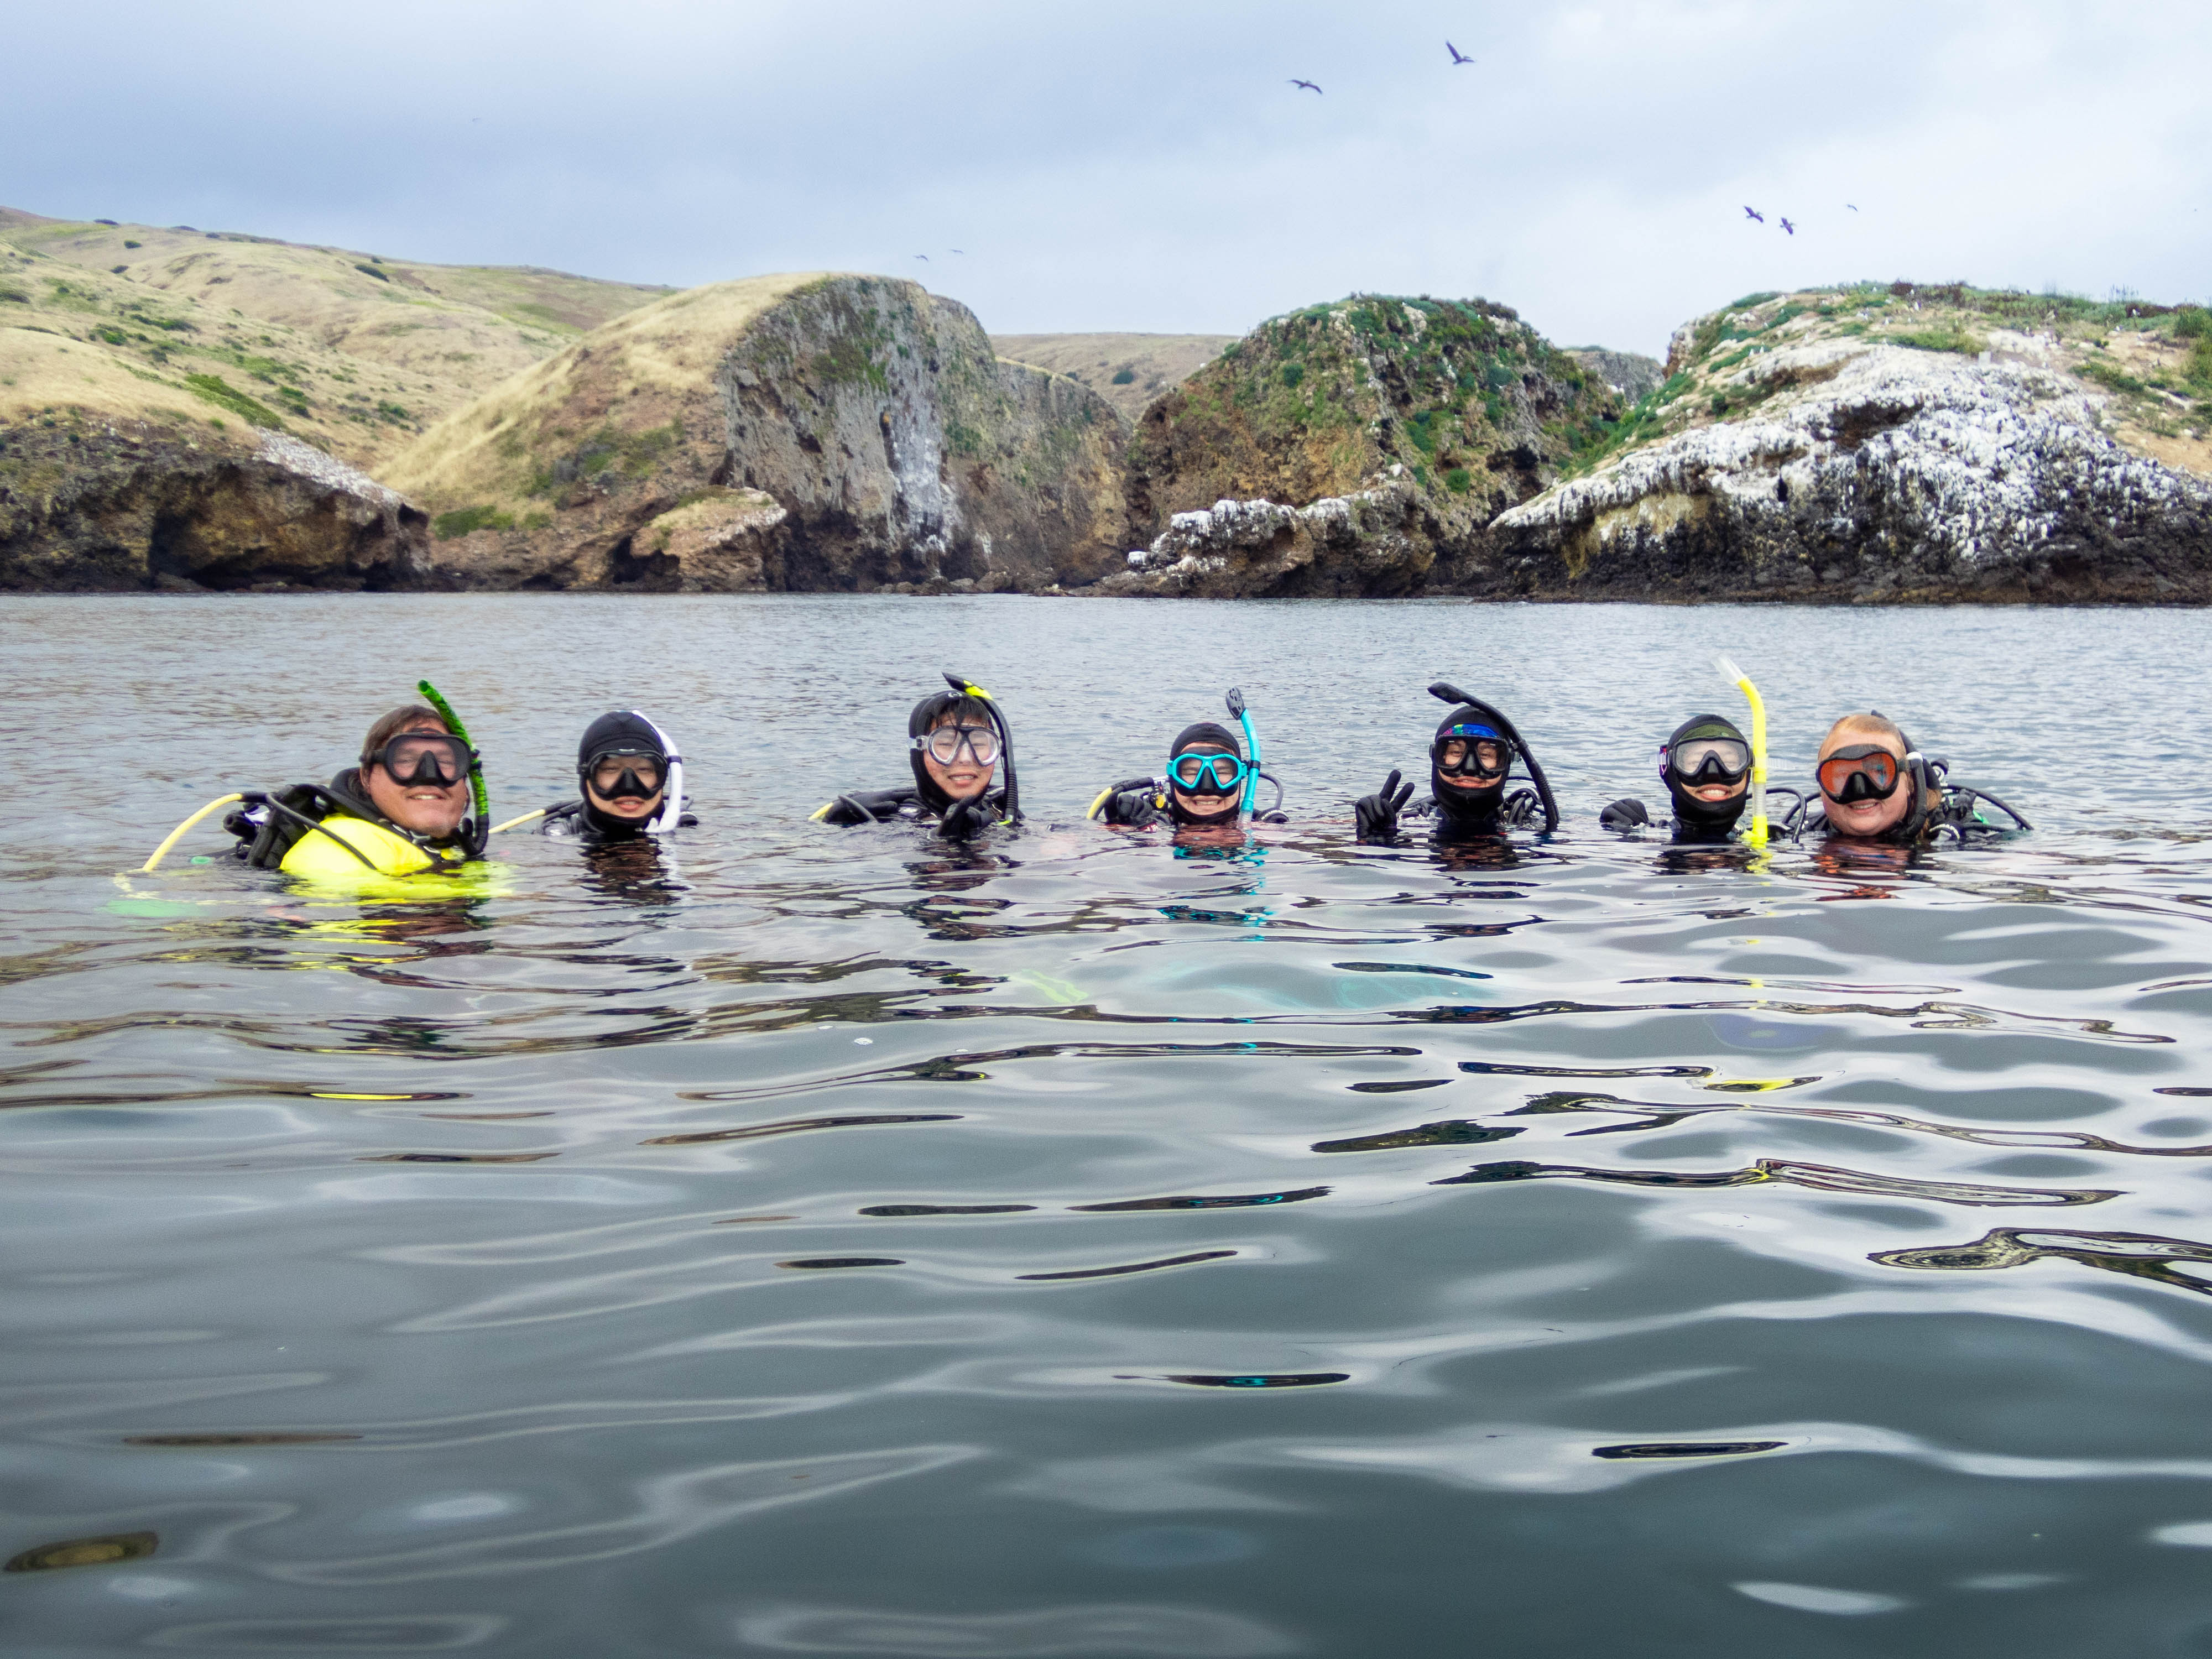 Scuba divers in wetsuits and snorkeling gear floating with a rocky island in the background.